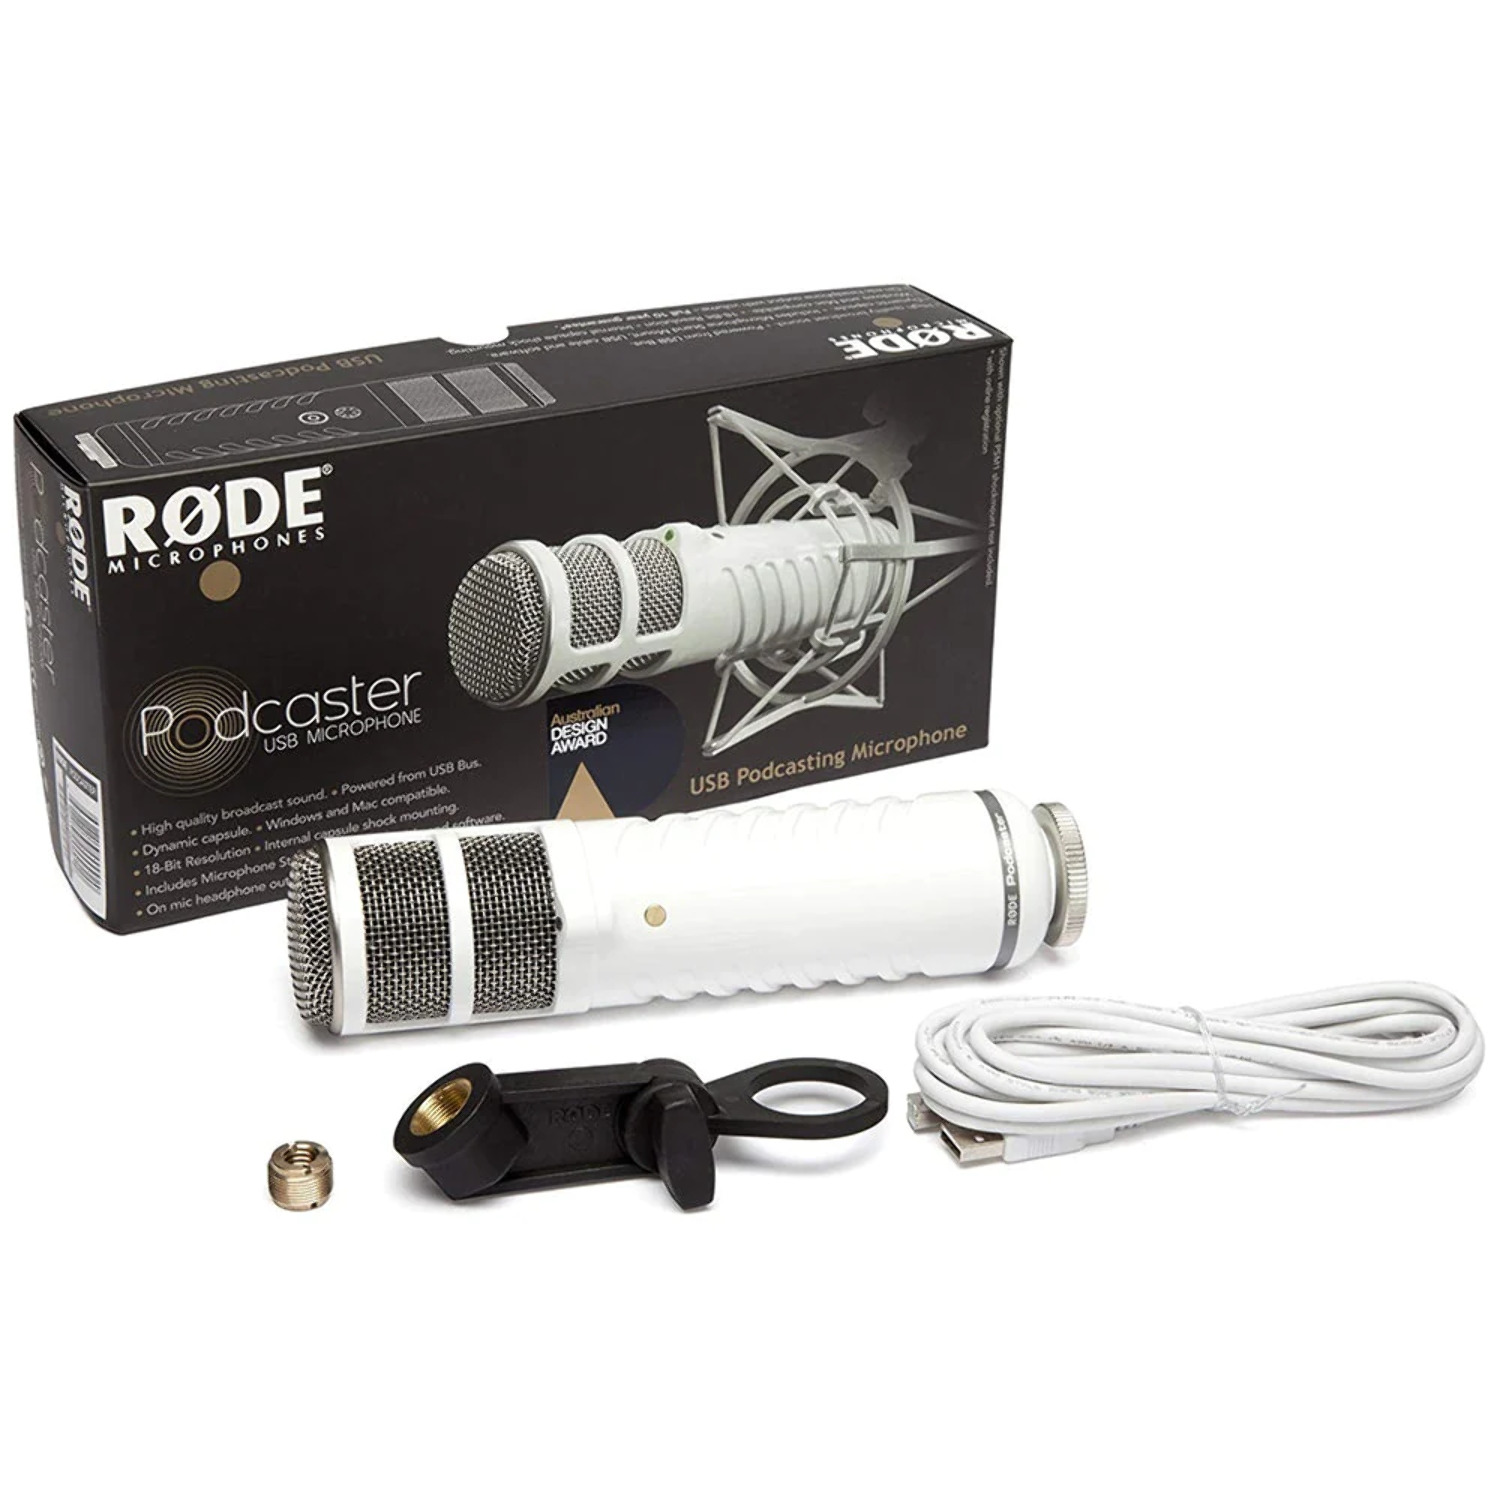 Rode Podcaster USB Dynamic Microphone - Mint Open Box - image 4 of 4